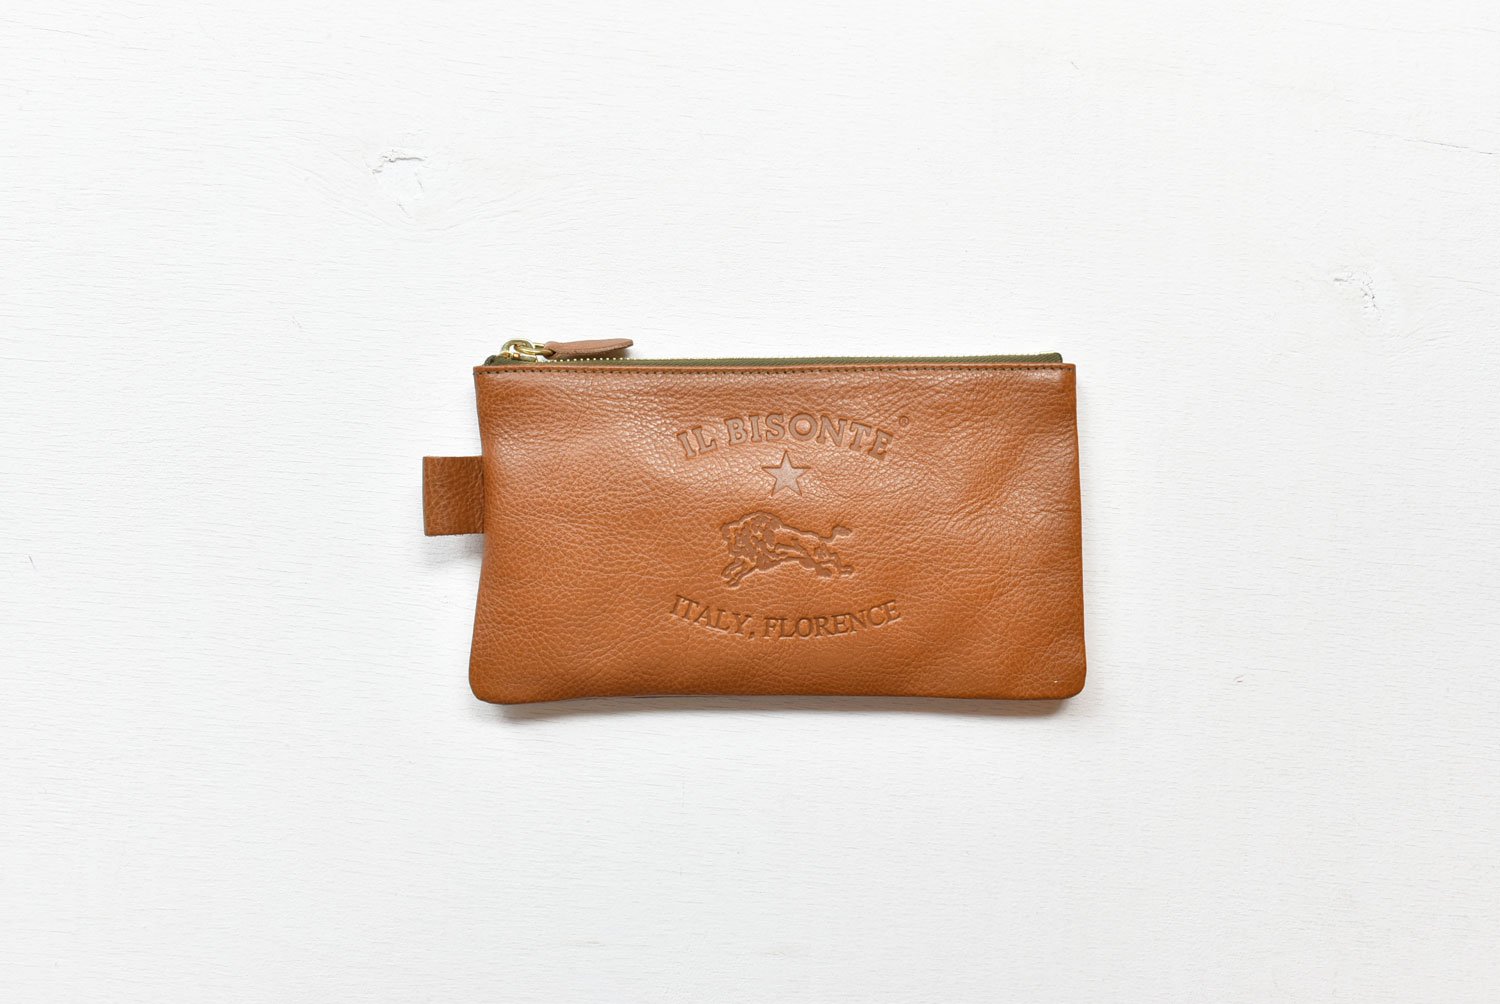 IL BISONTE LEATHER POUCH イルビゾンテ レザーポーチ - 財布